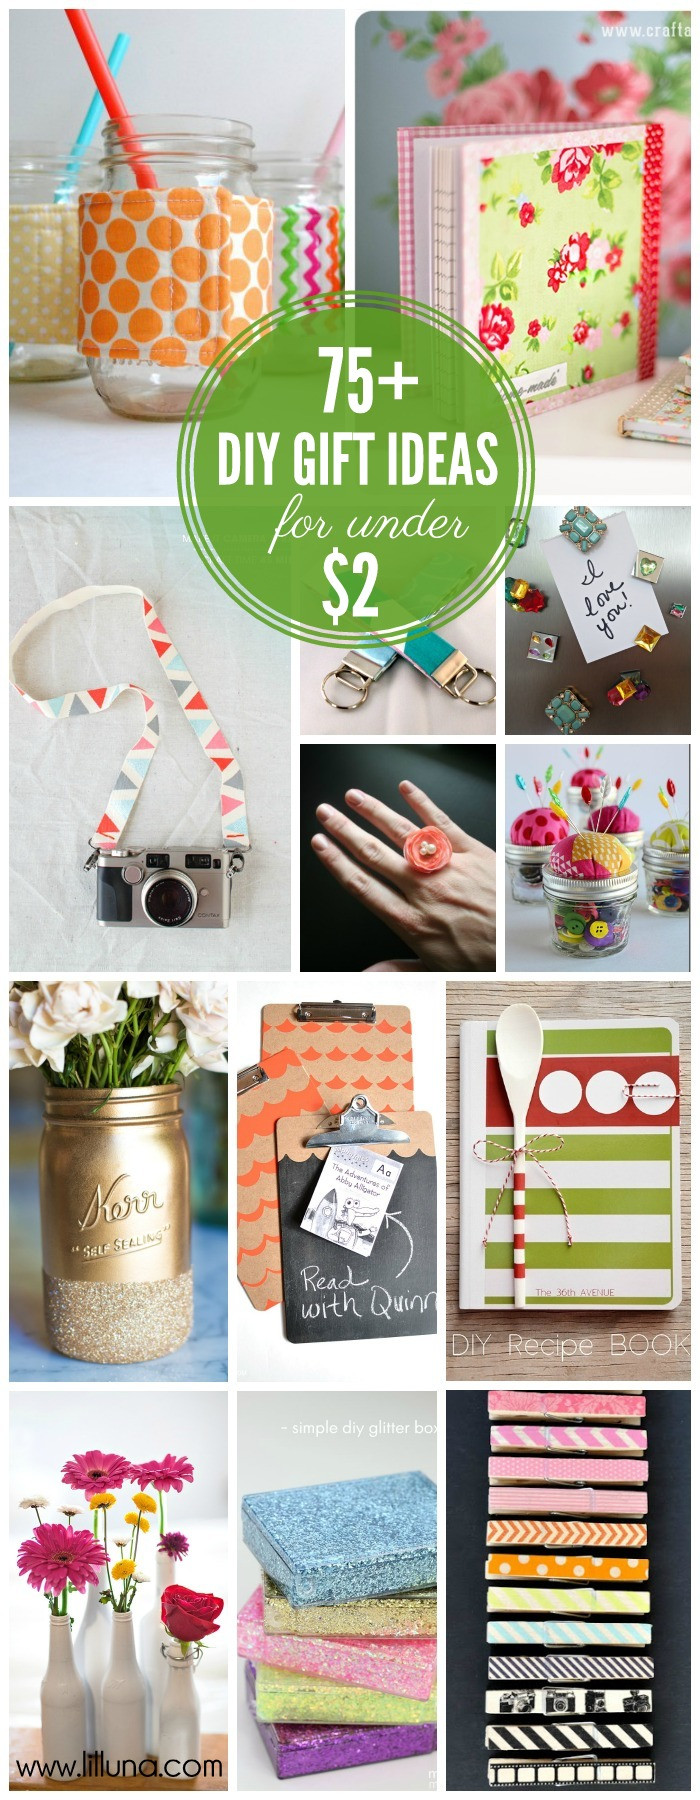 Cheap DIY Gifts
 Inexpensive Gift Ideas